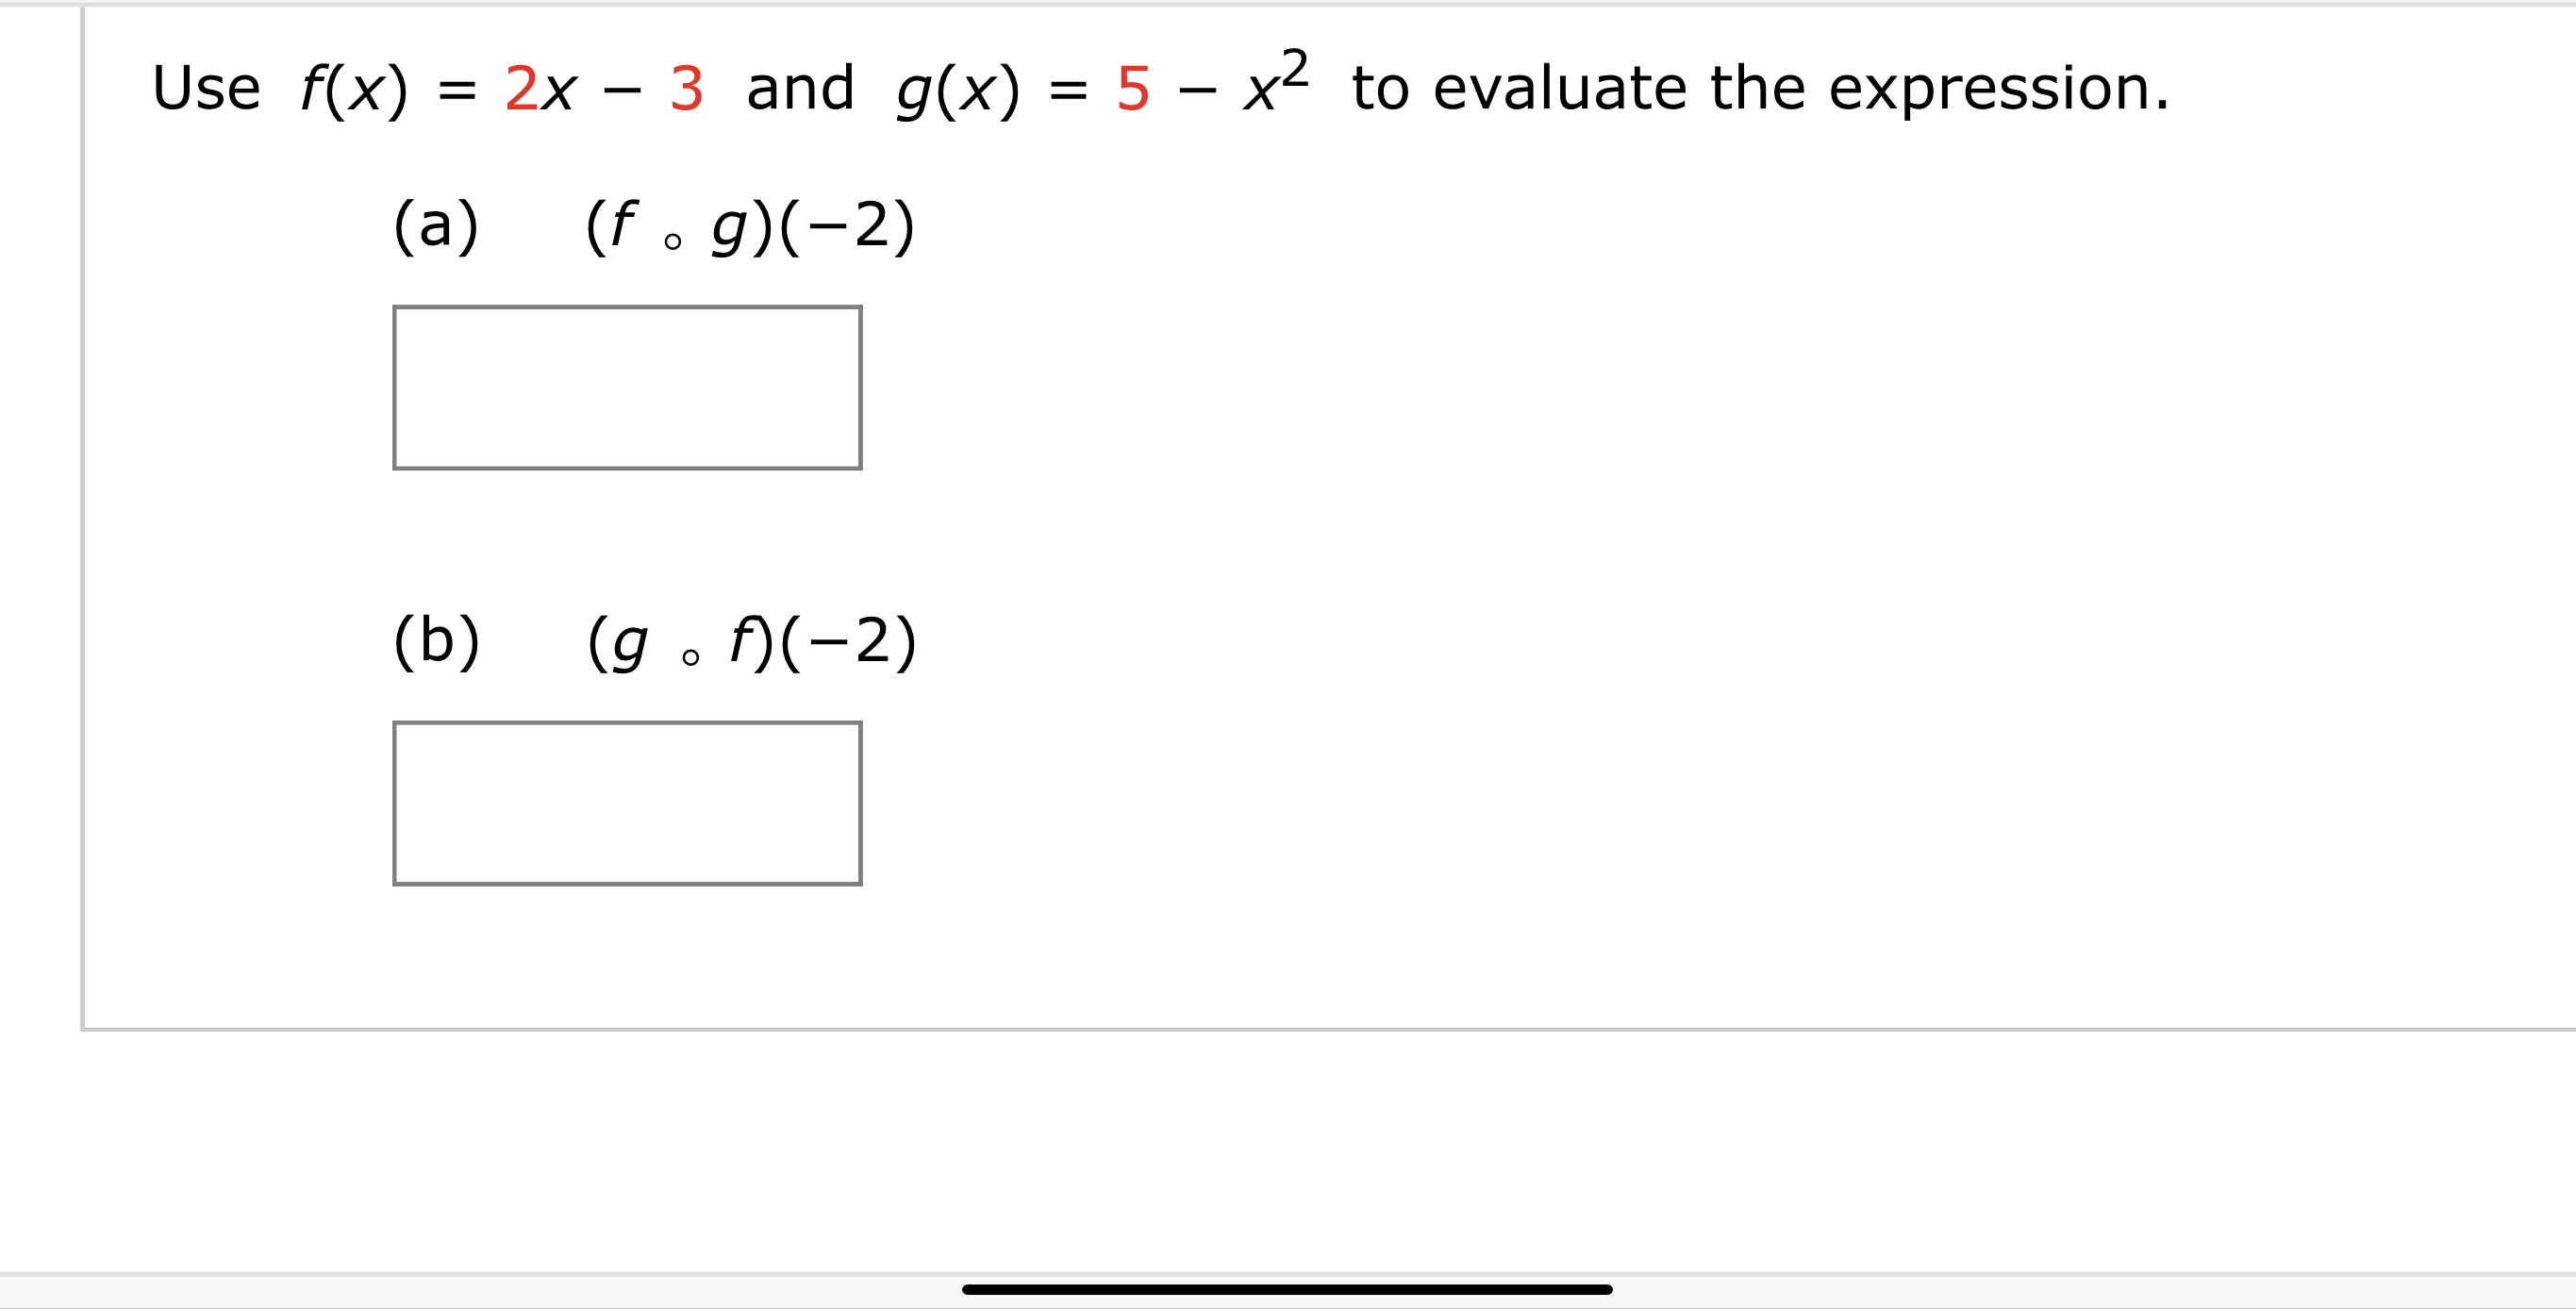 Use f(x) = 2x – 3 and g(x) = 5 – x² to evaluate the expression.
(a)
(f . g)(-2)
(b)
(g . f)(-2)
